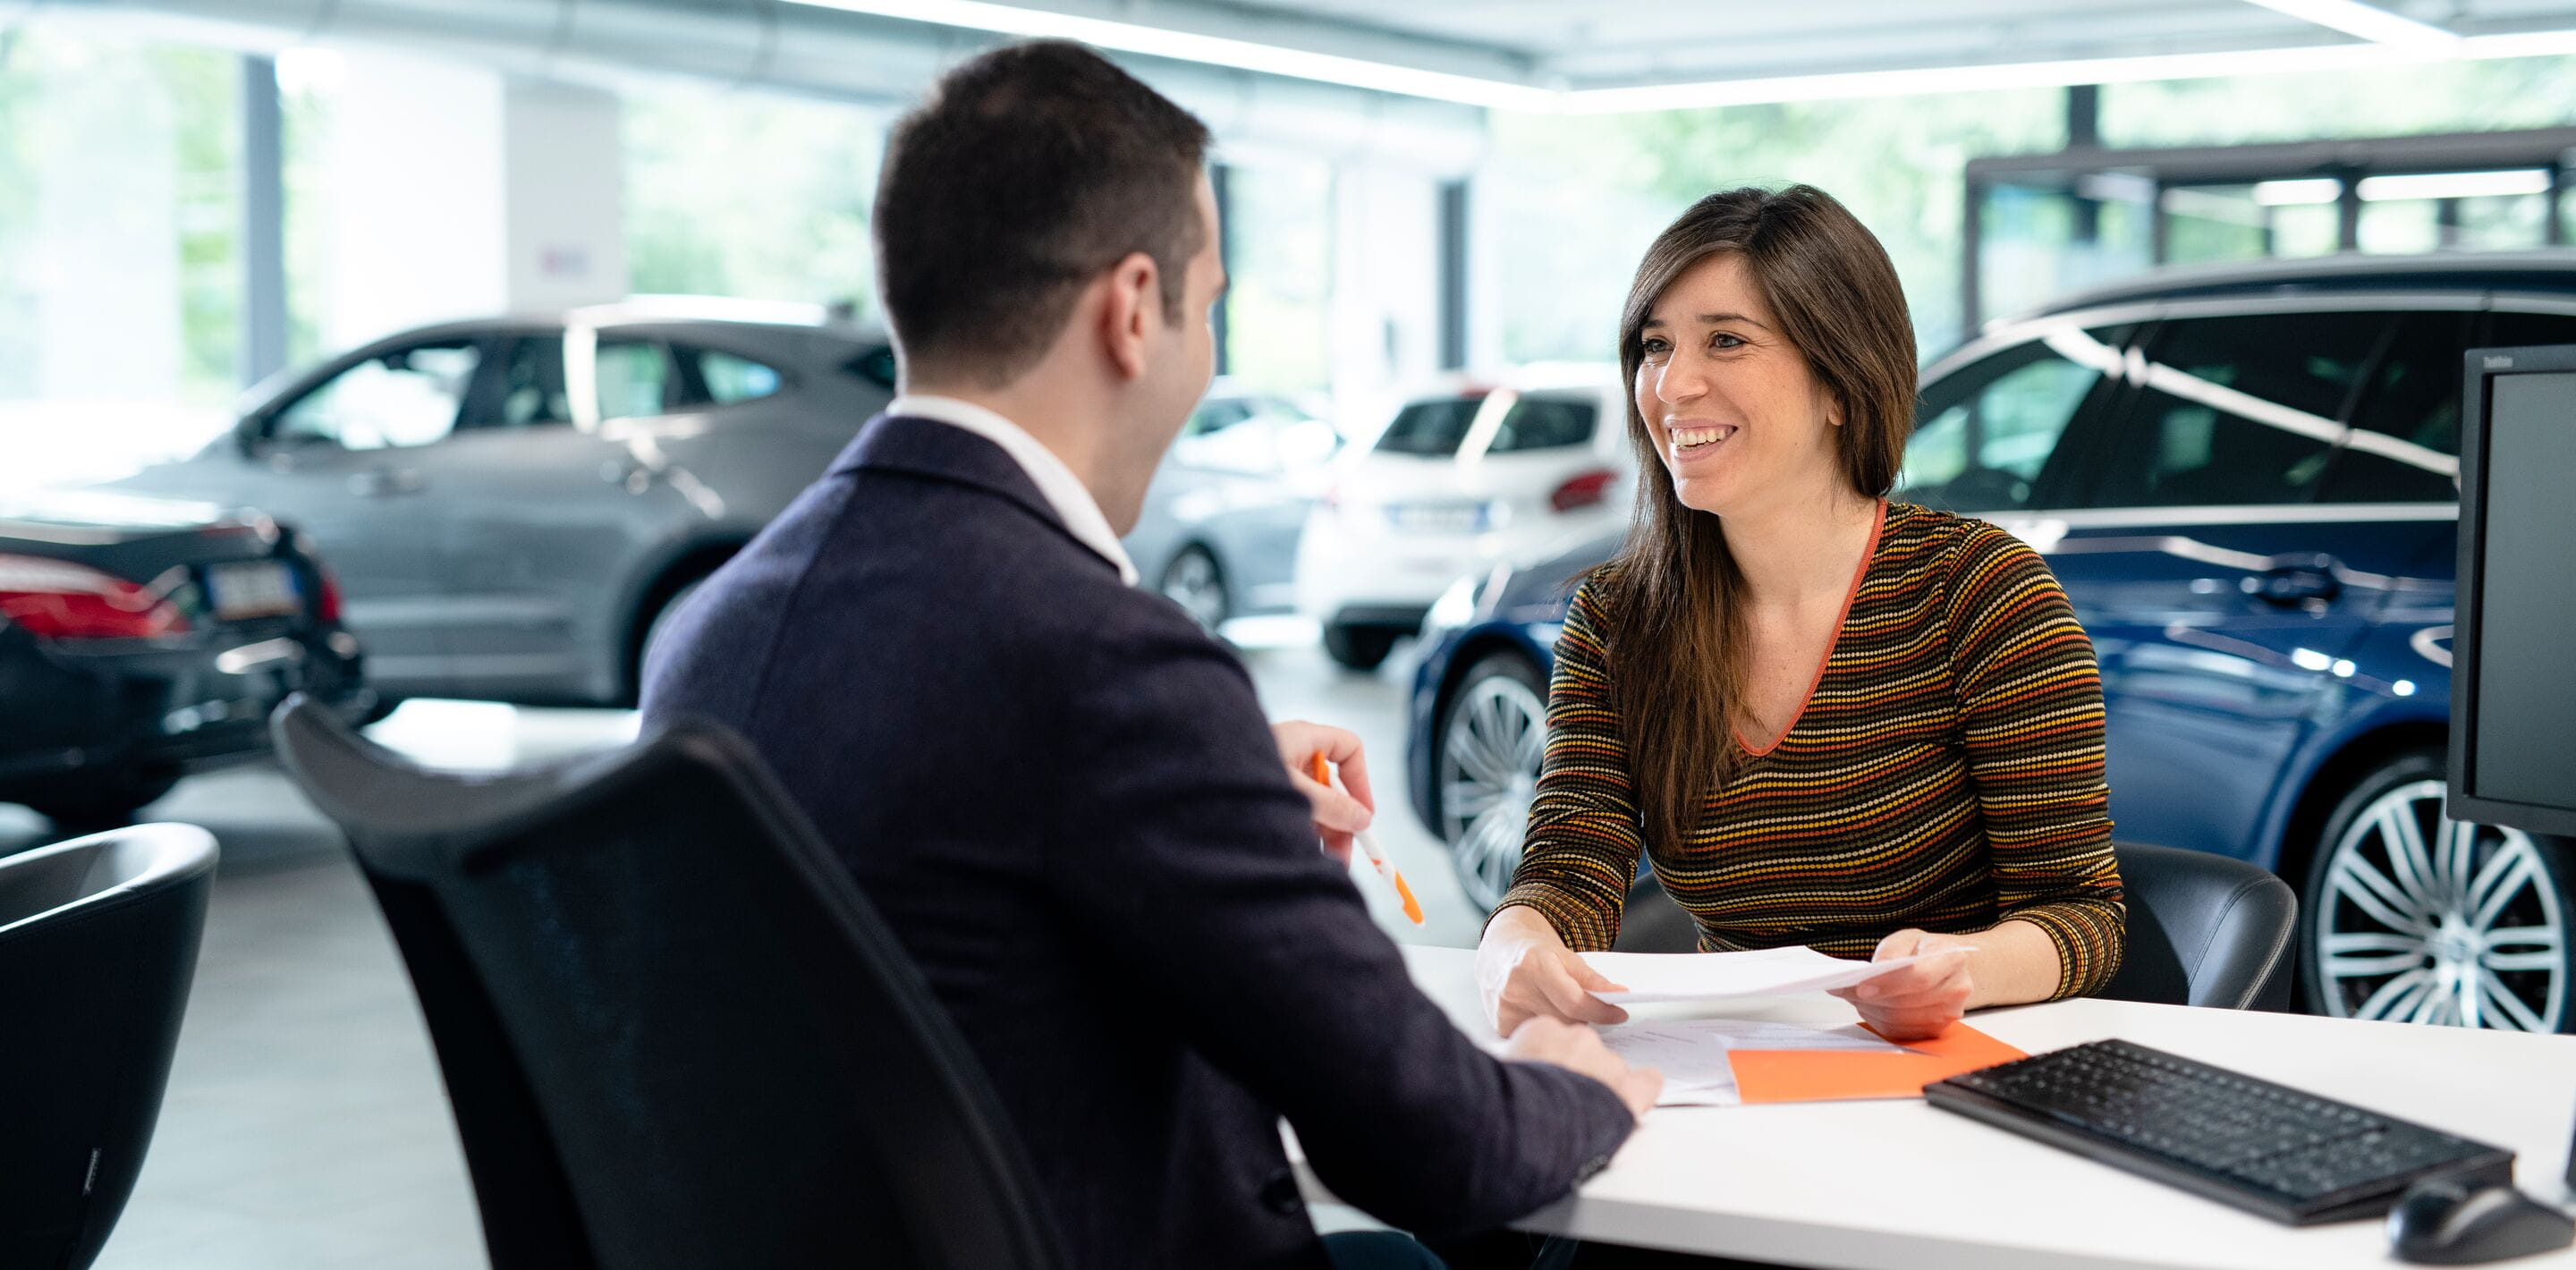 Dealership - man and woman signing papers - cars in background